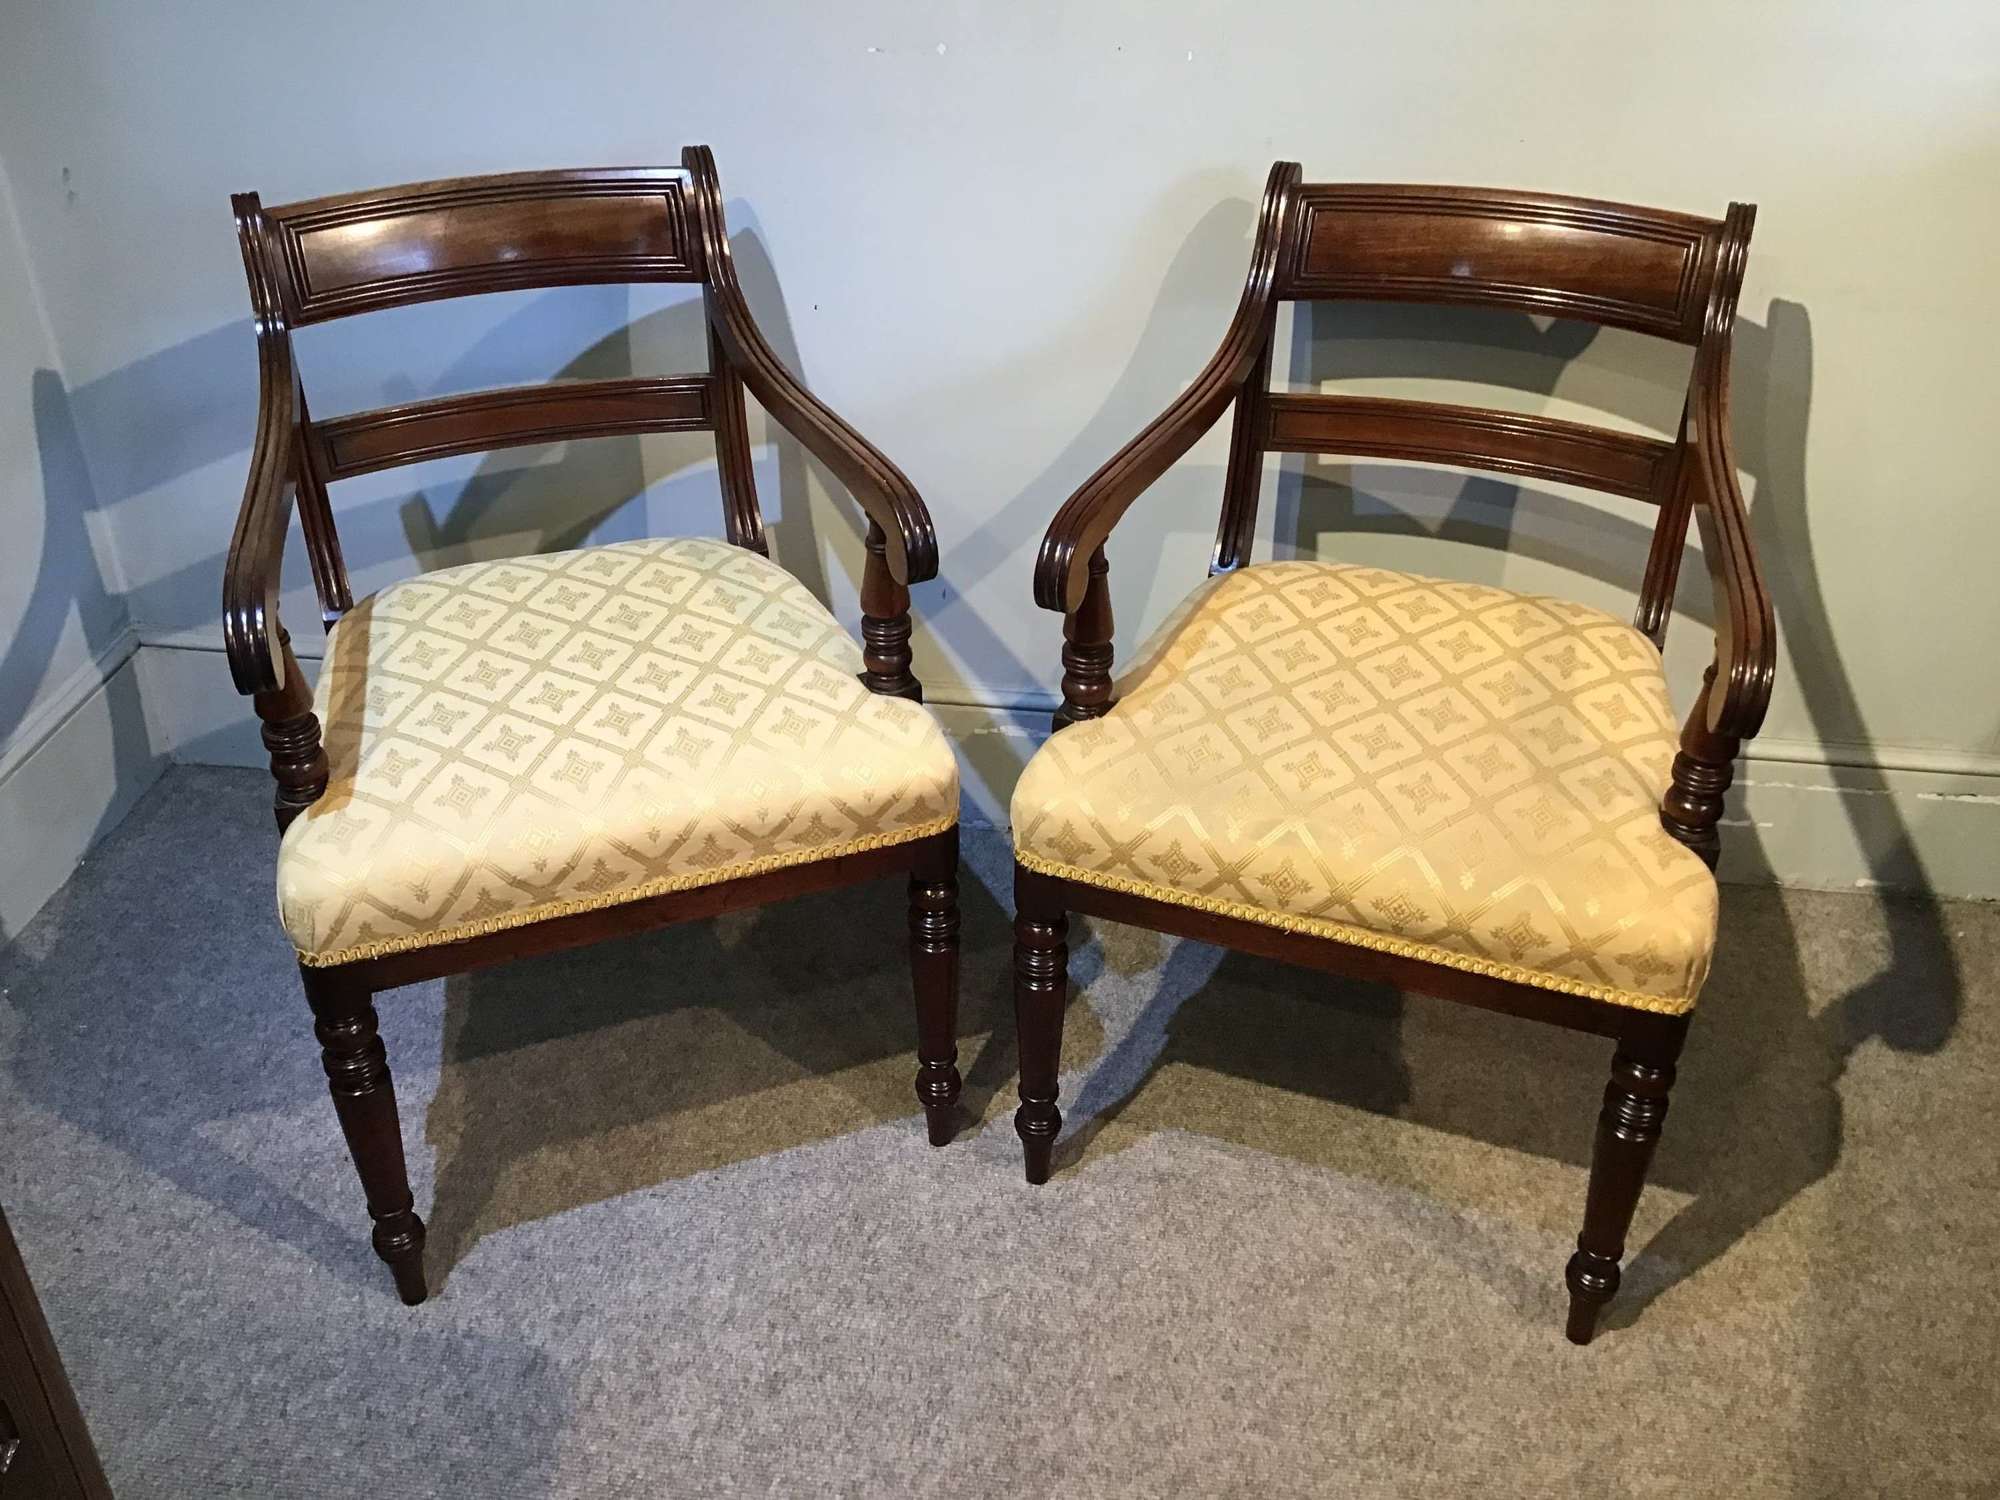 Pair of antique elbow chairs